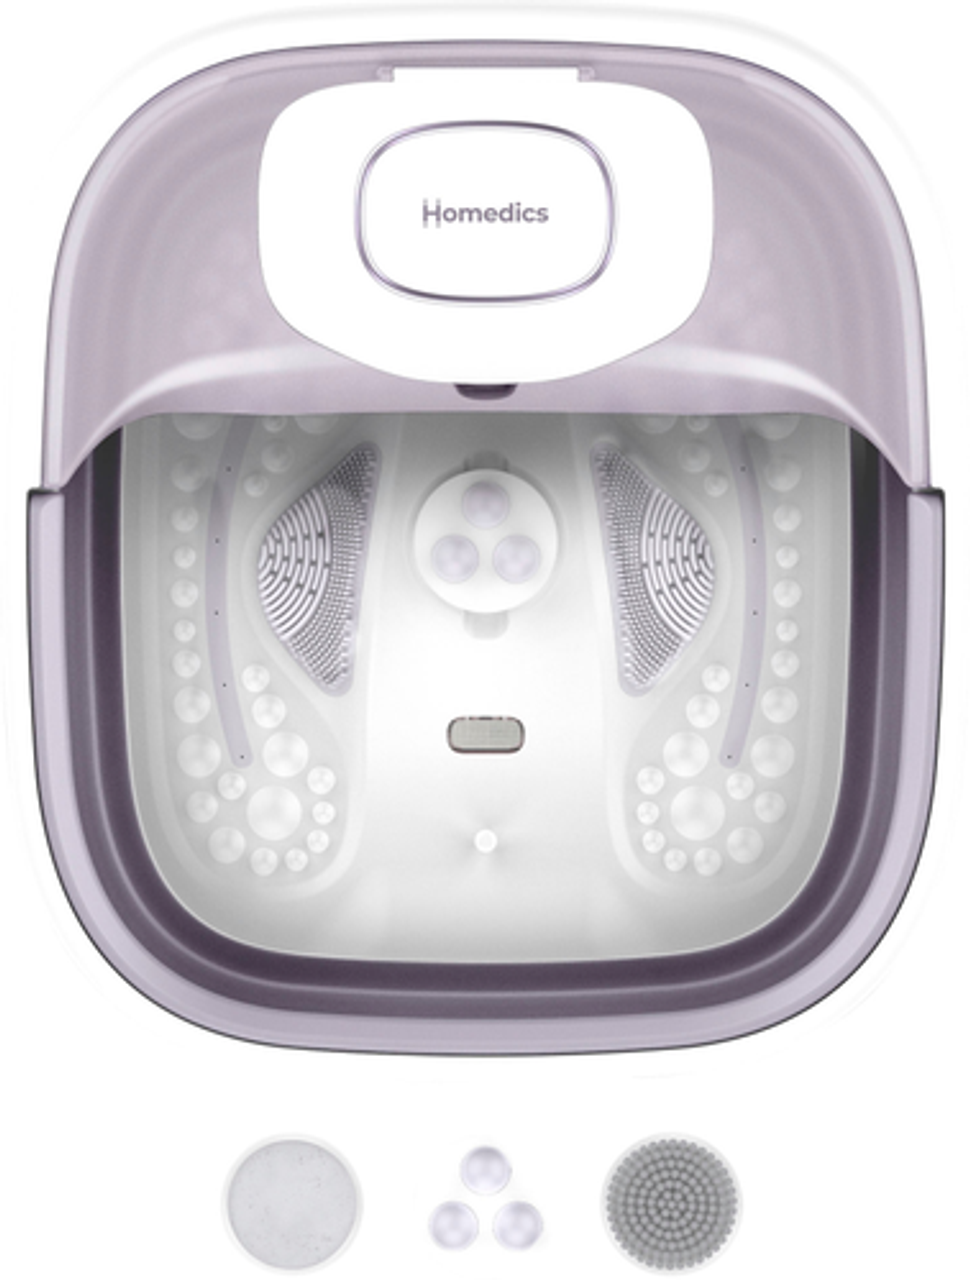 HoMedics - Smart Space Deluxe Footbath with Heat Boost - White